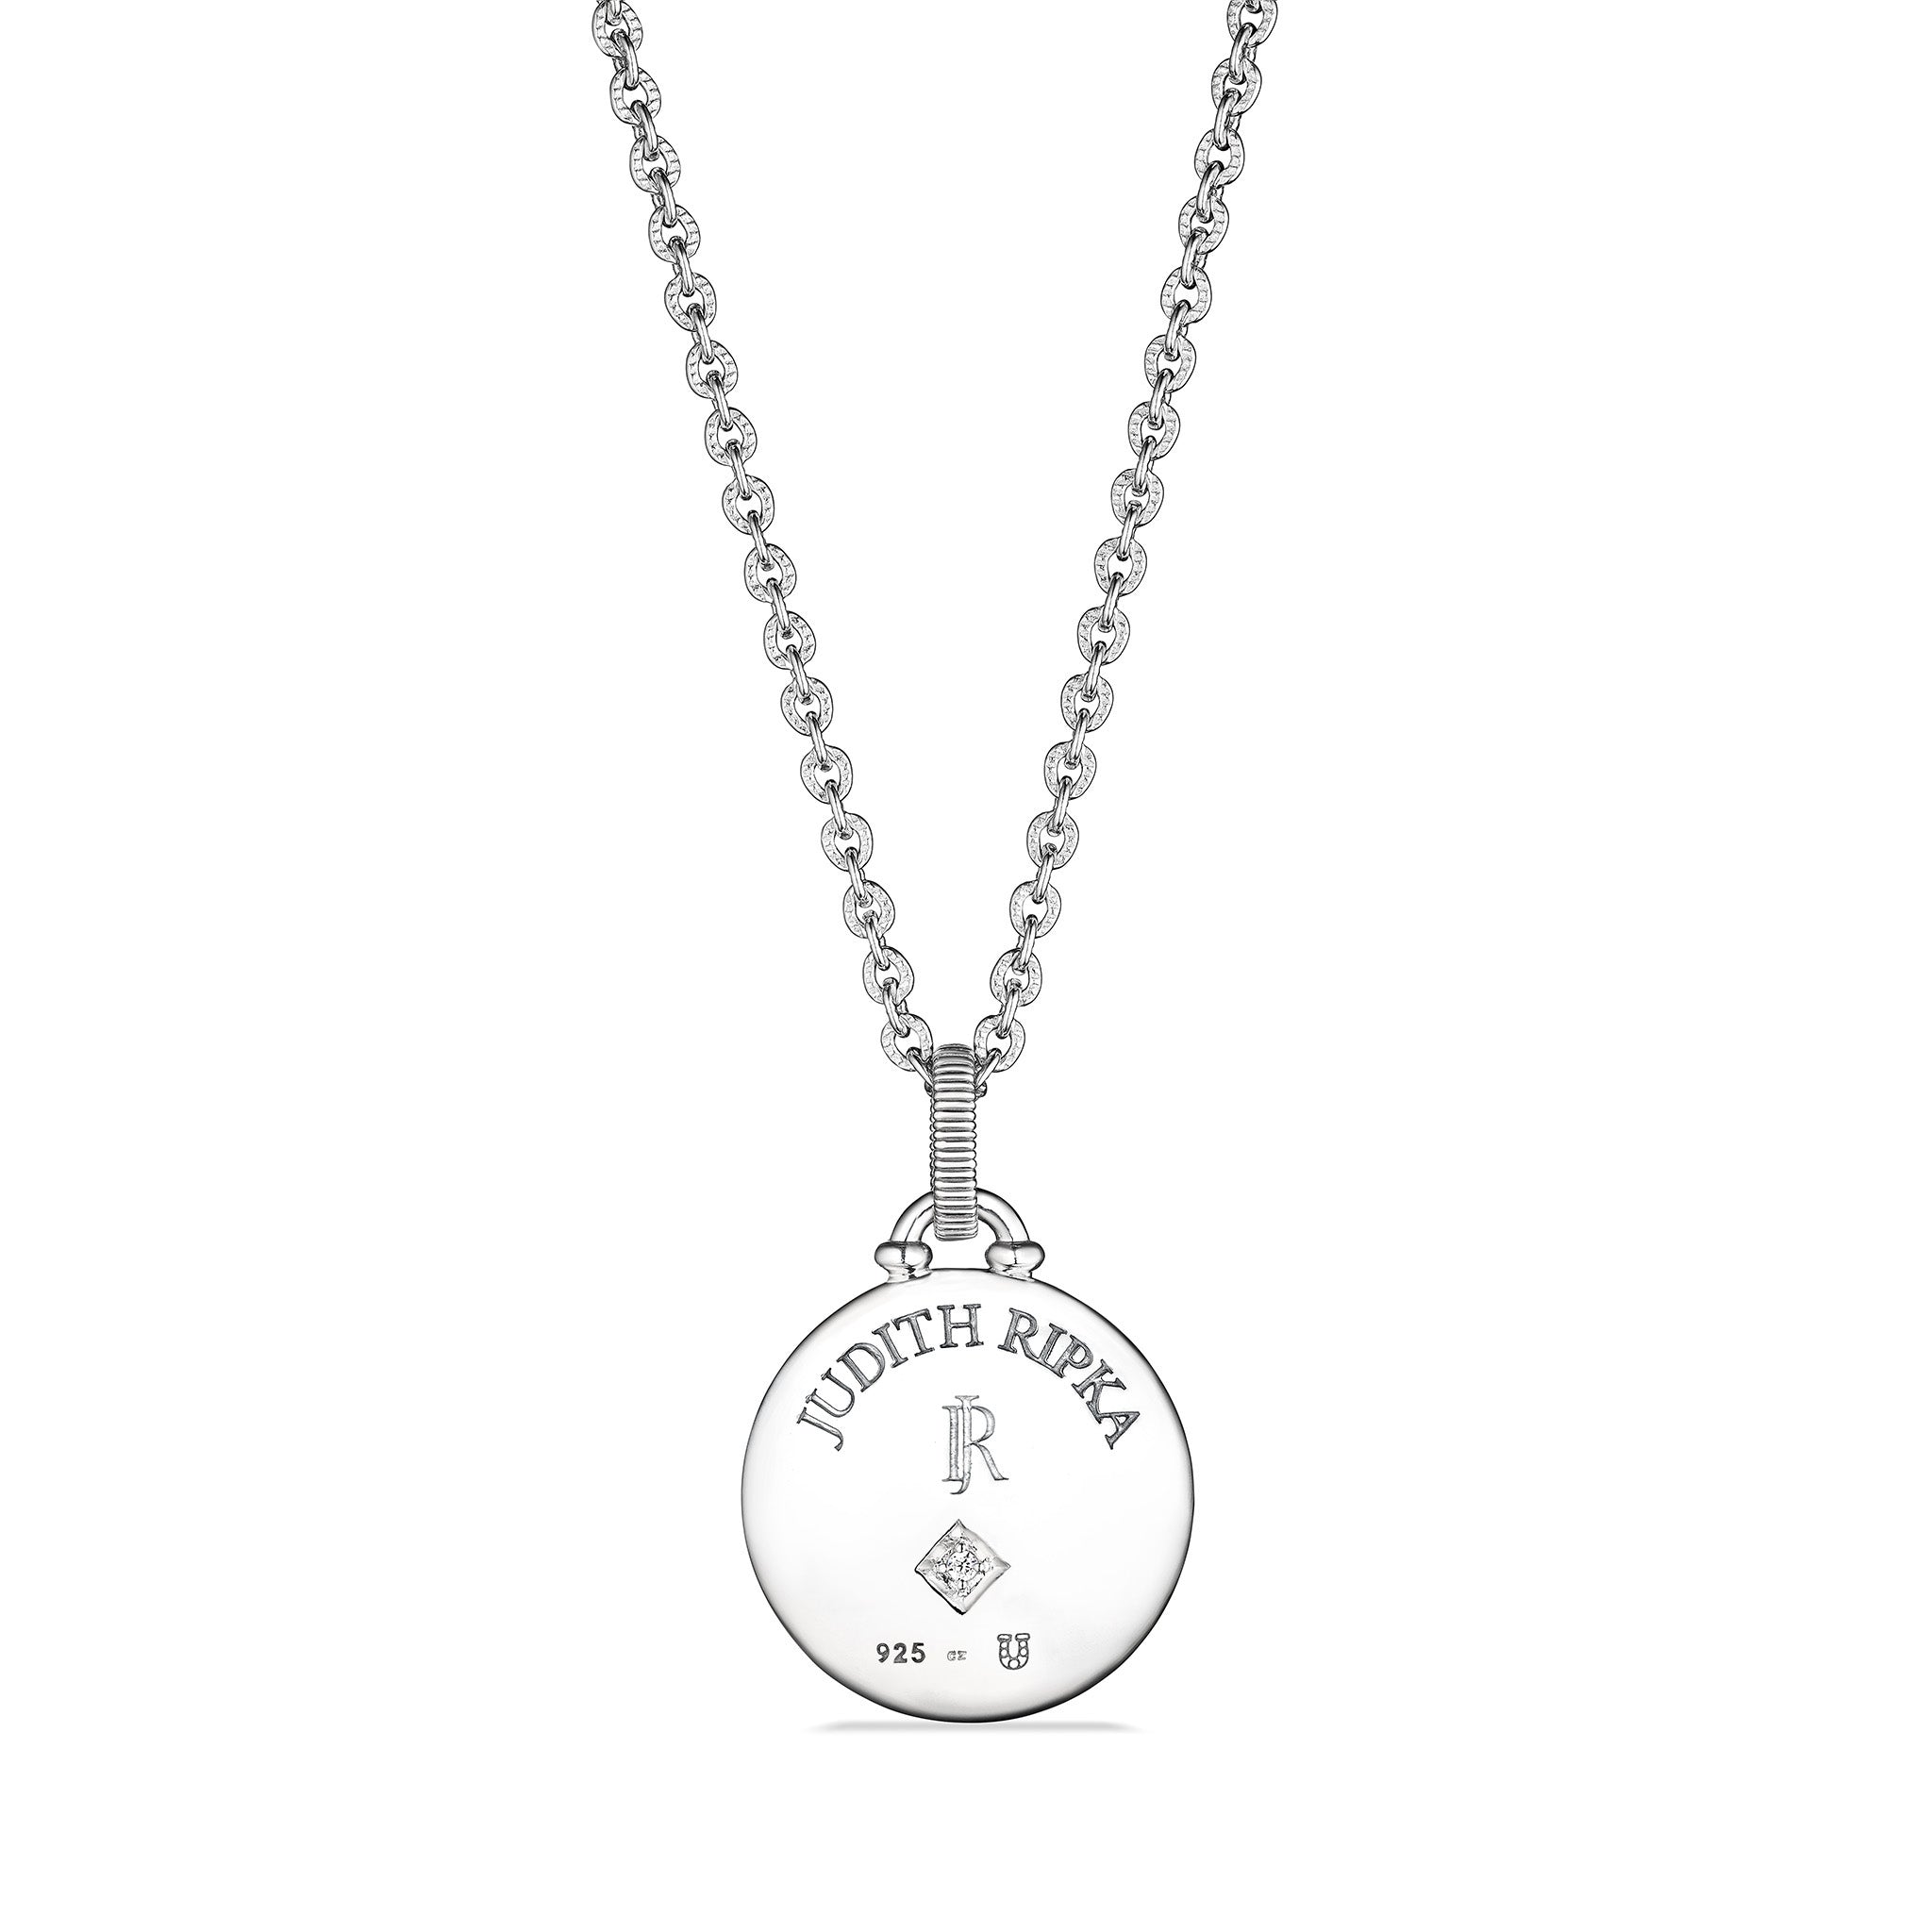 Little Luxuries Star Light Medallion Necklace with Diamonds and 18K Gold